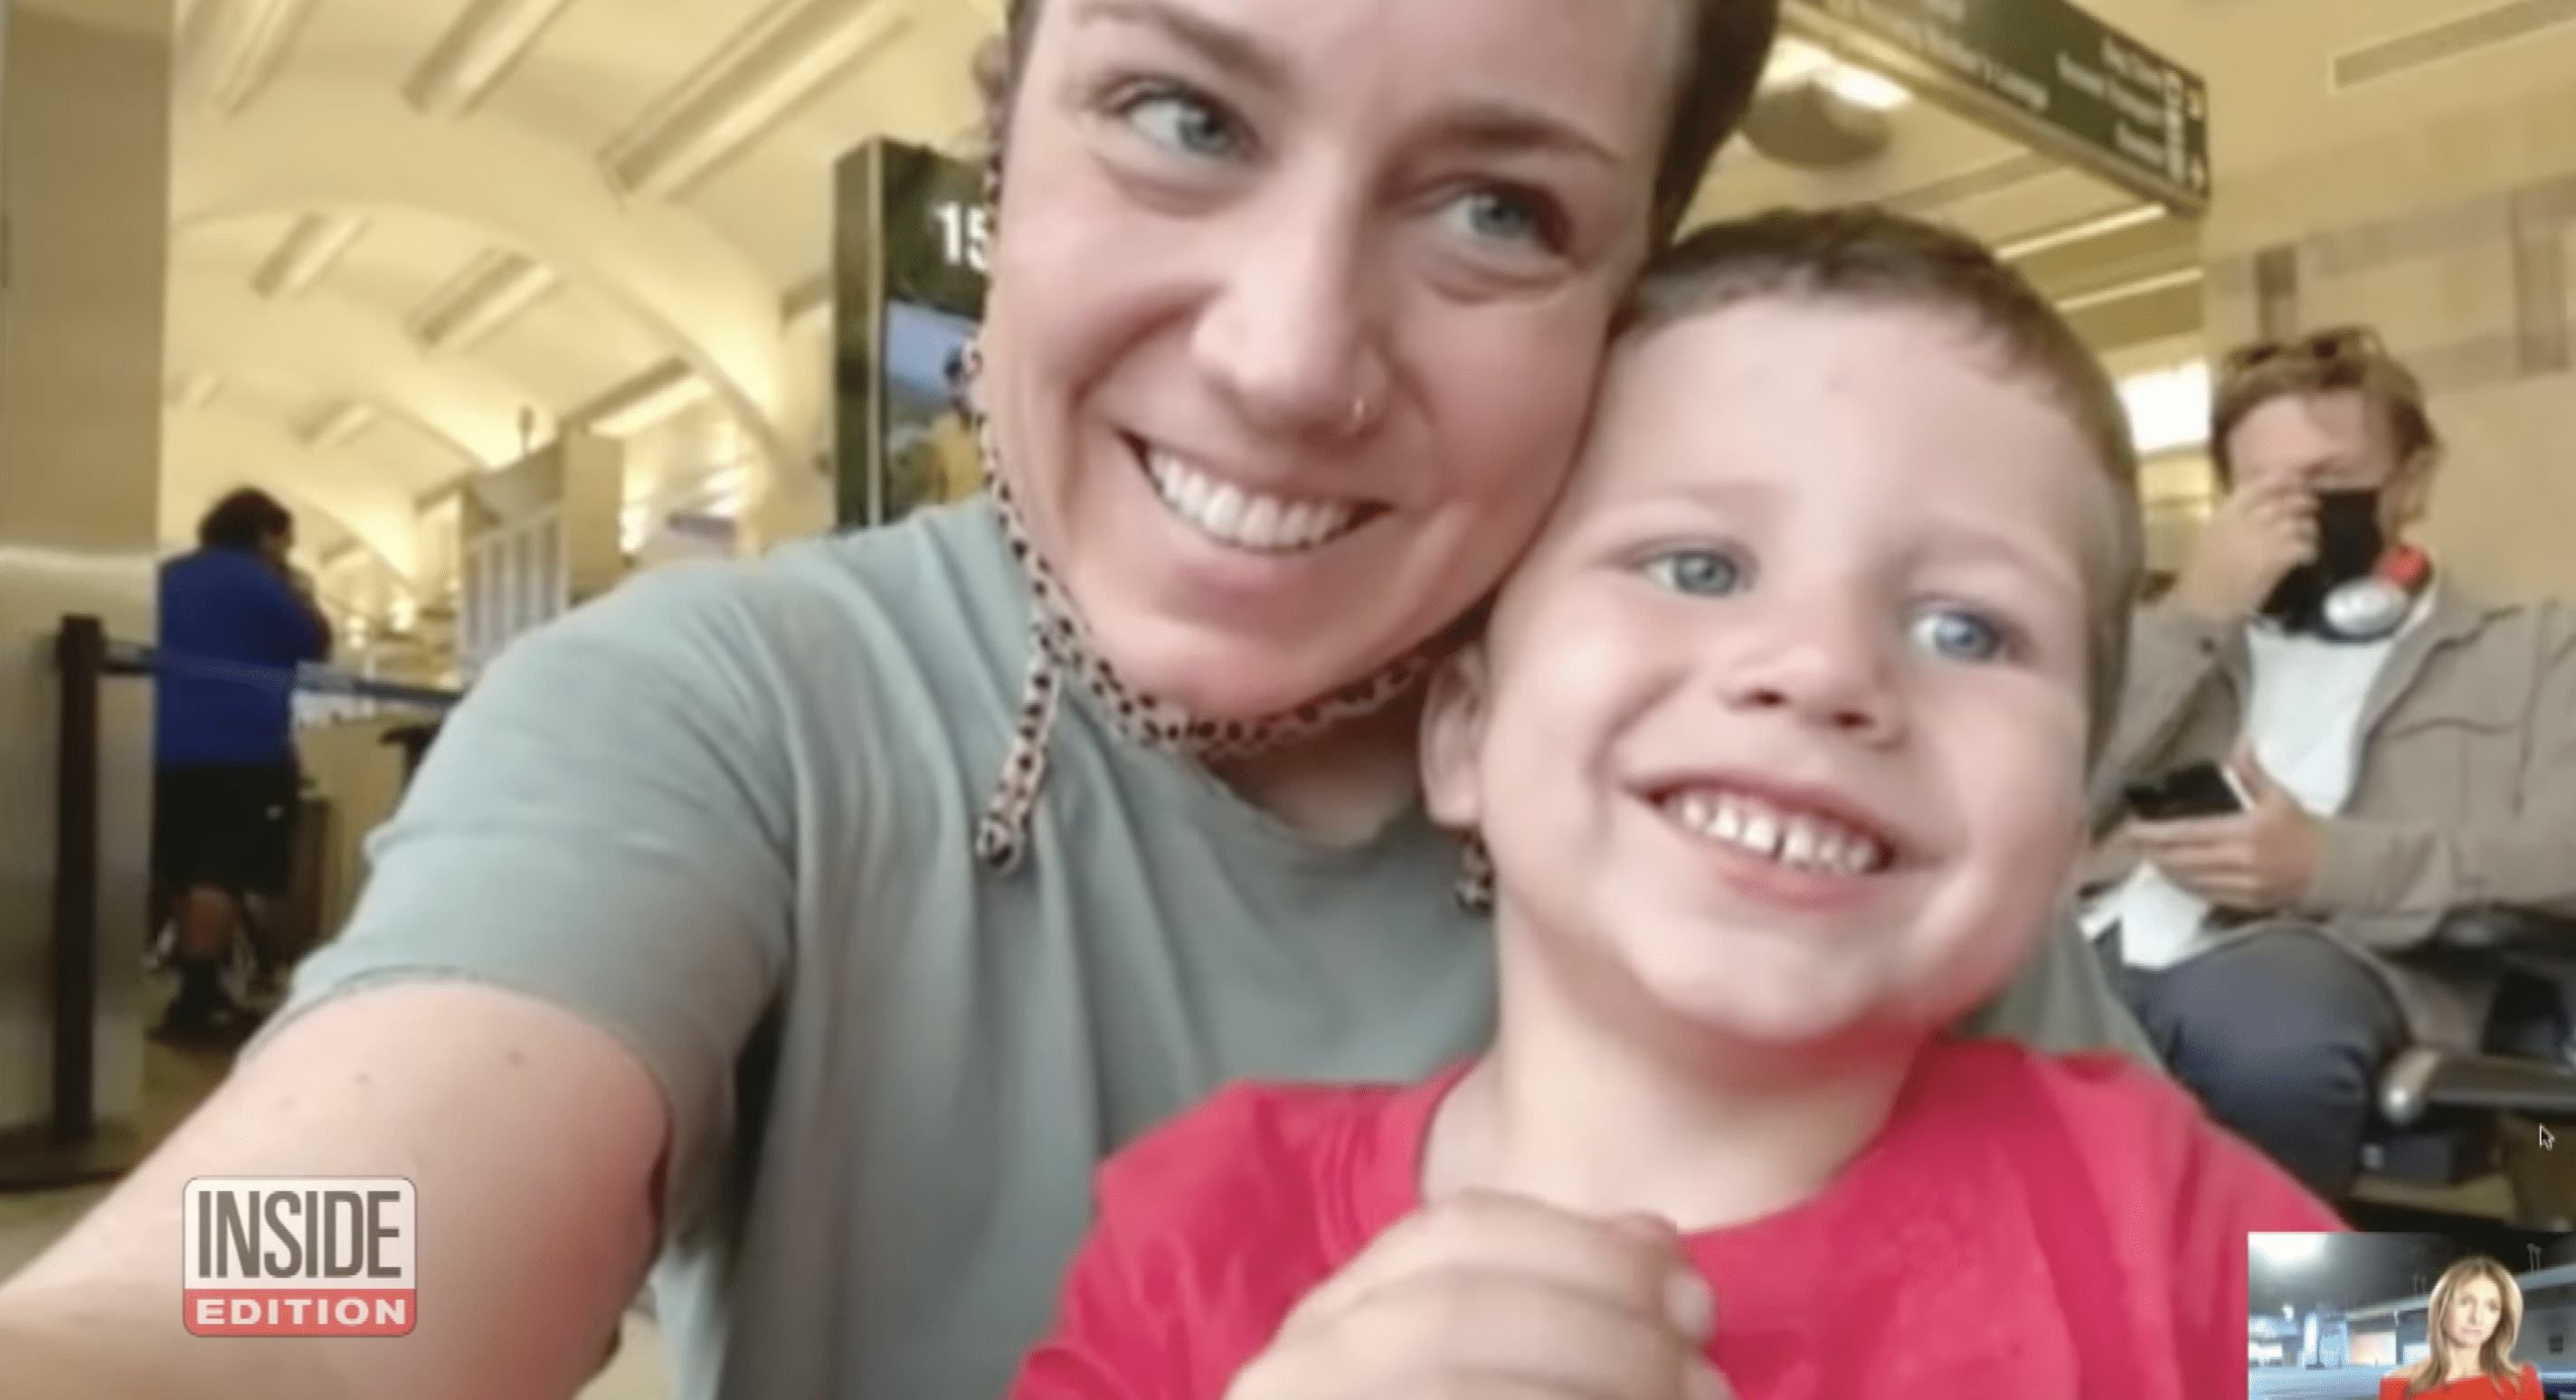 Amanda Ennis pictured with her son, Noah Clarke, who was allegedly kidnapped by his father. | Photo: YouTube.com/Inside Edition